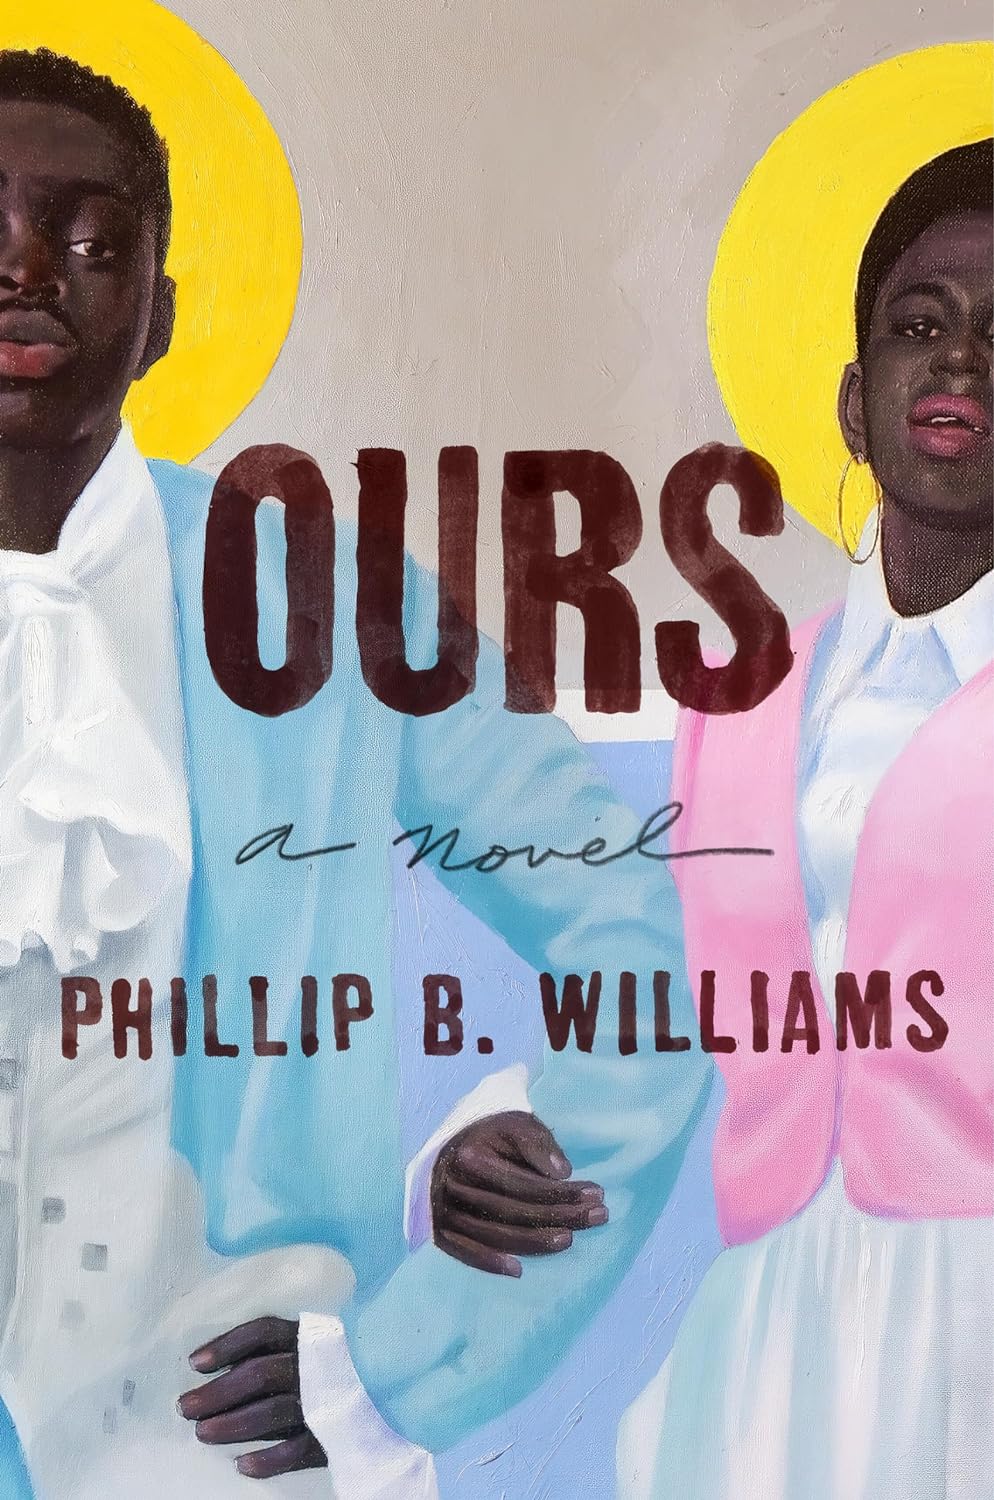 Image for "Ours"